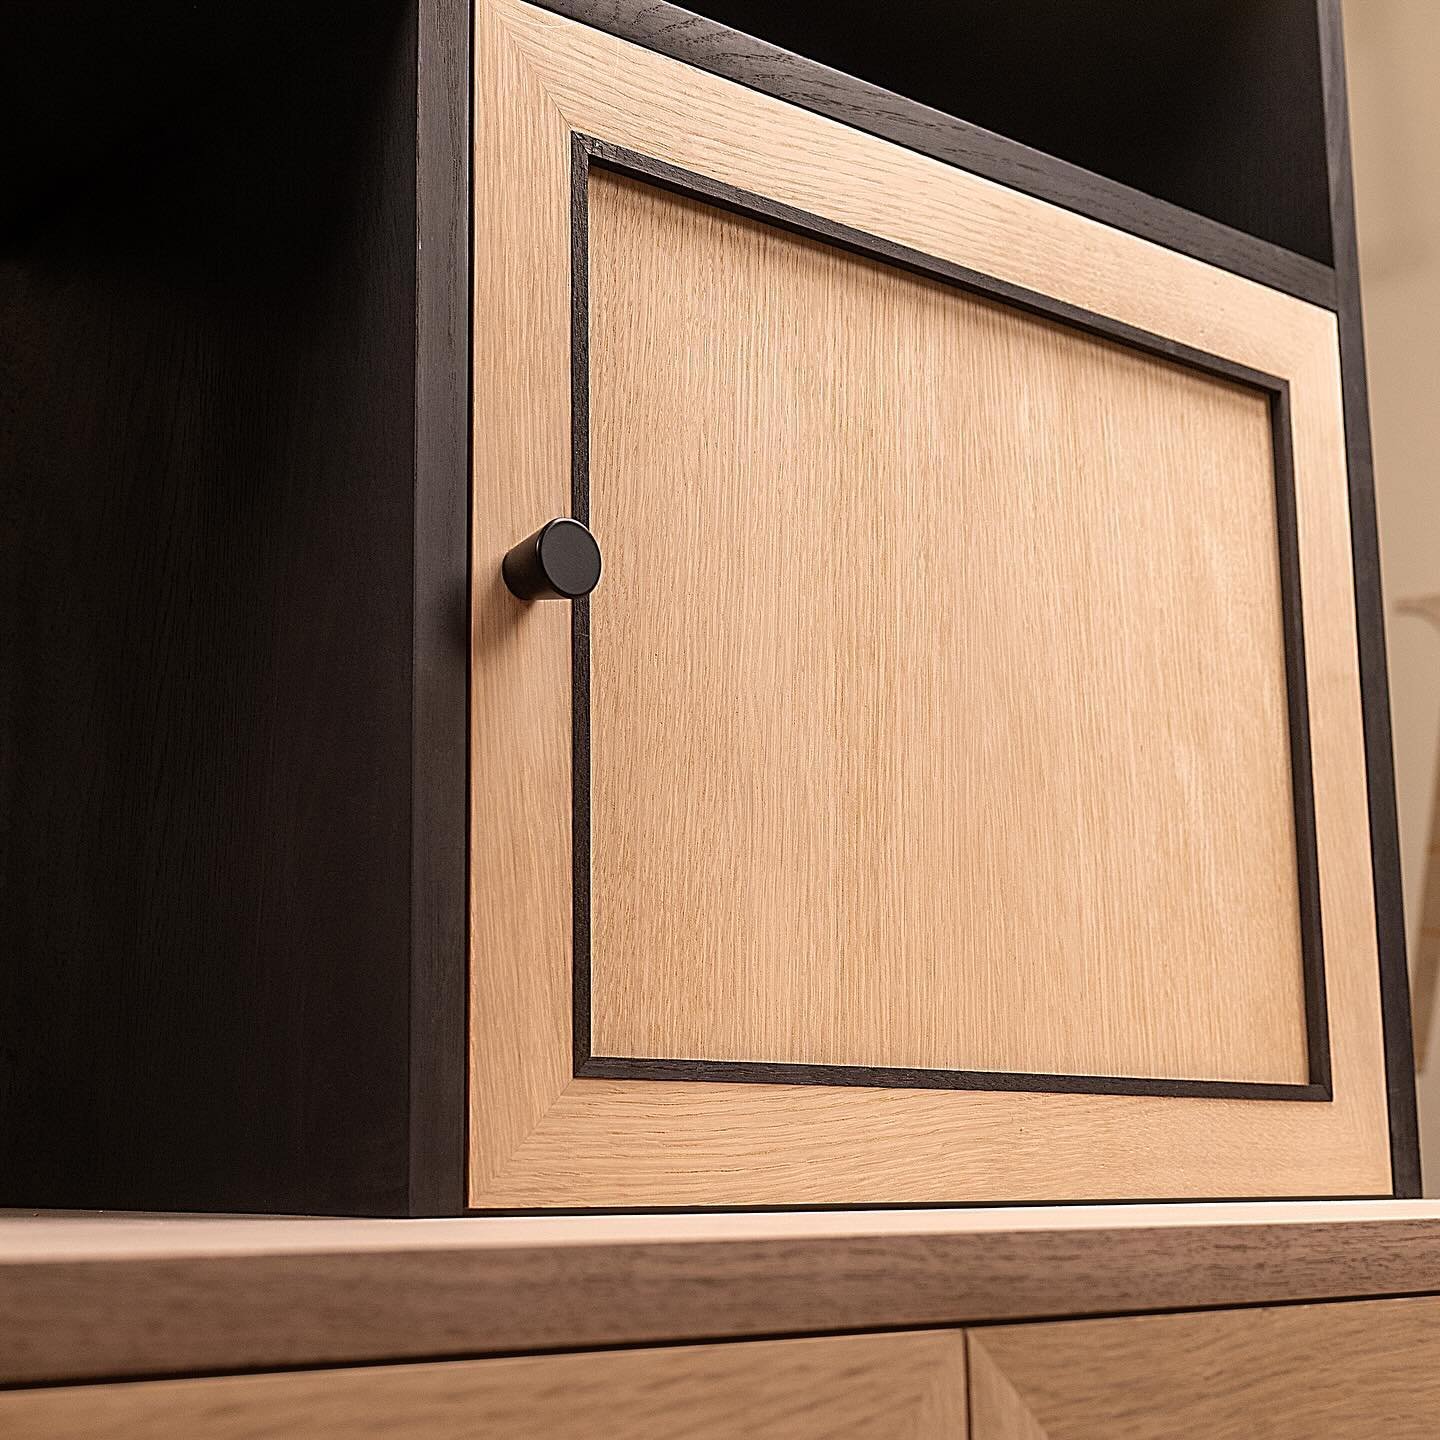 (link in bio) One of the most under-appreciated parts of inset cabinet doors is getting consistent reveals. When done correctly it pushes the craftsmanship to the next level. I think this is also emphasized when the grain of the frames is tight and s